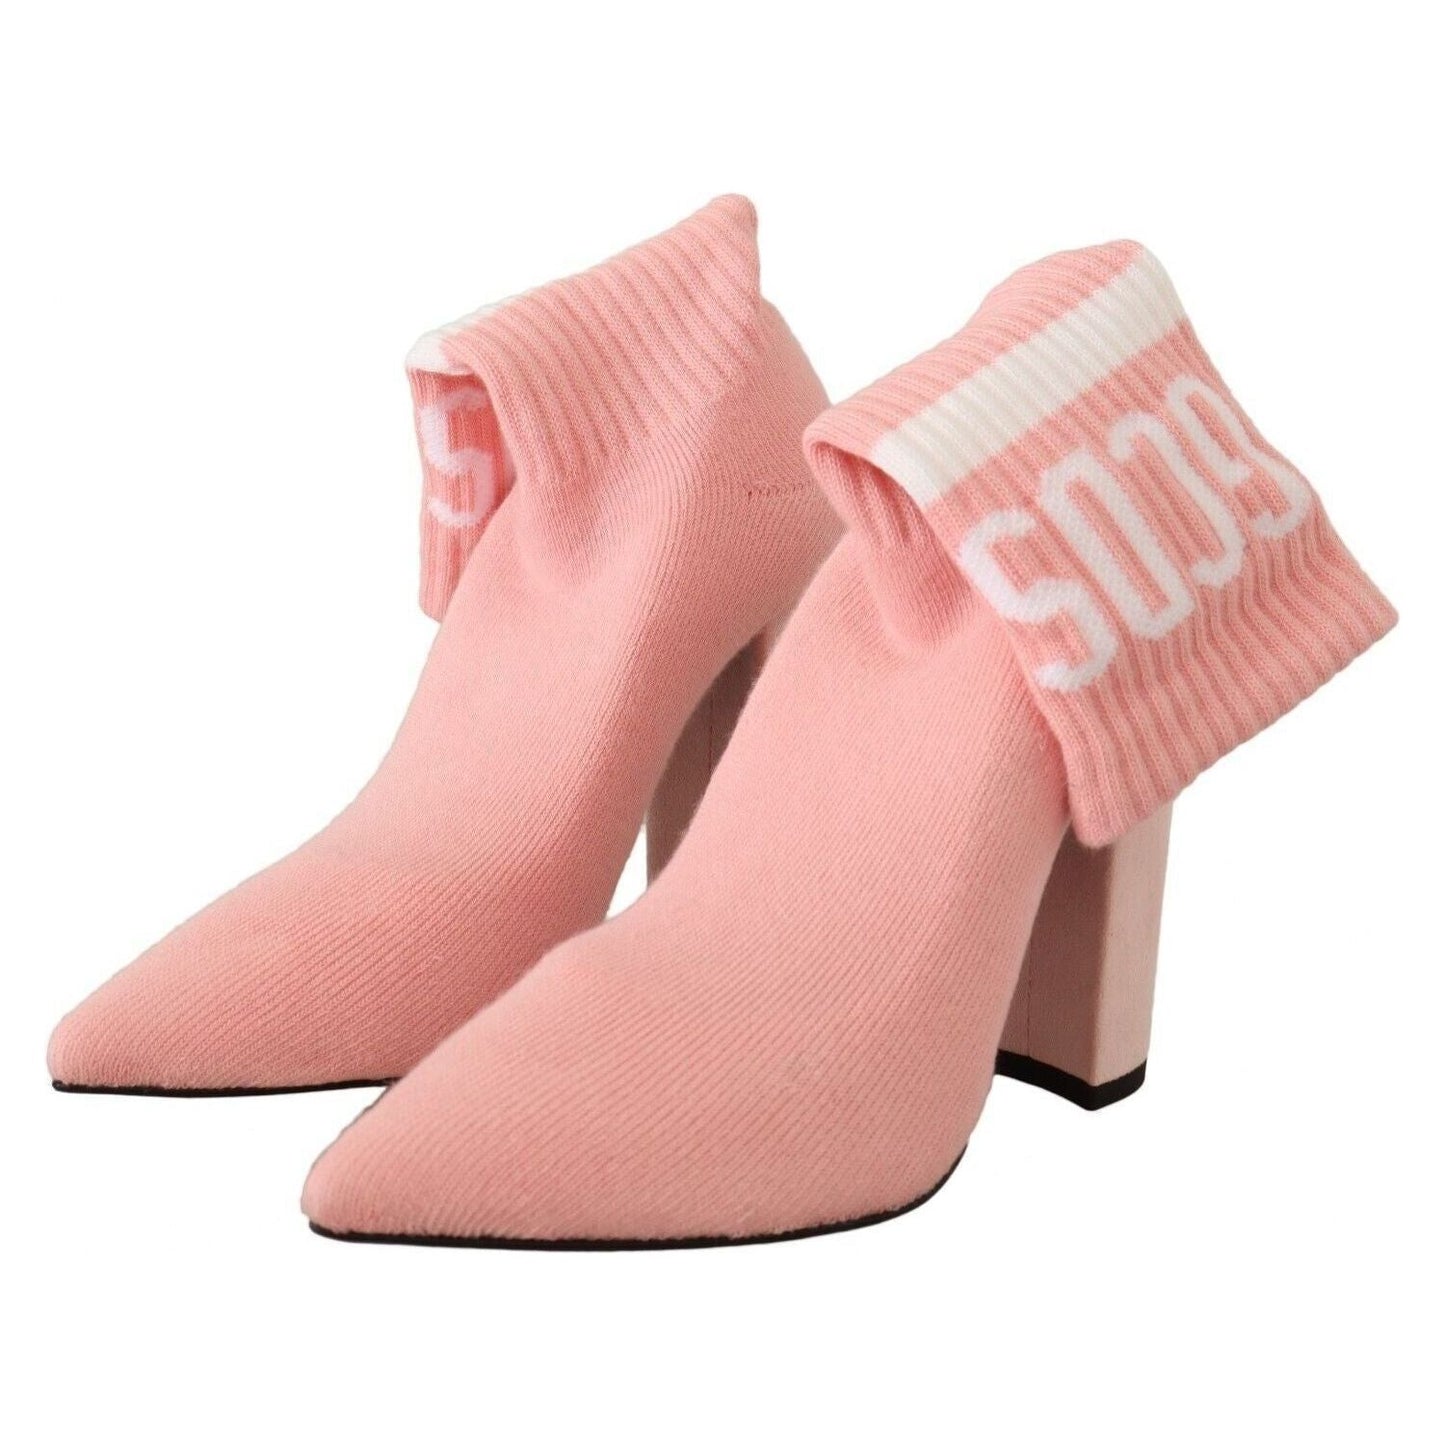 GCDS Chic Pink Suede Ankle Boots with Logo Socks pink-suede-logo-socks-block-heel-ankle-boots-shoes s-l1600-182-c907b1f4-93b.jpg